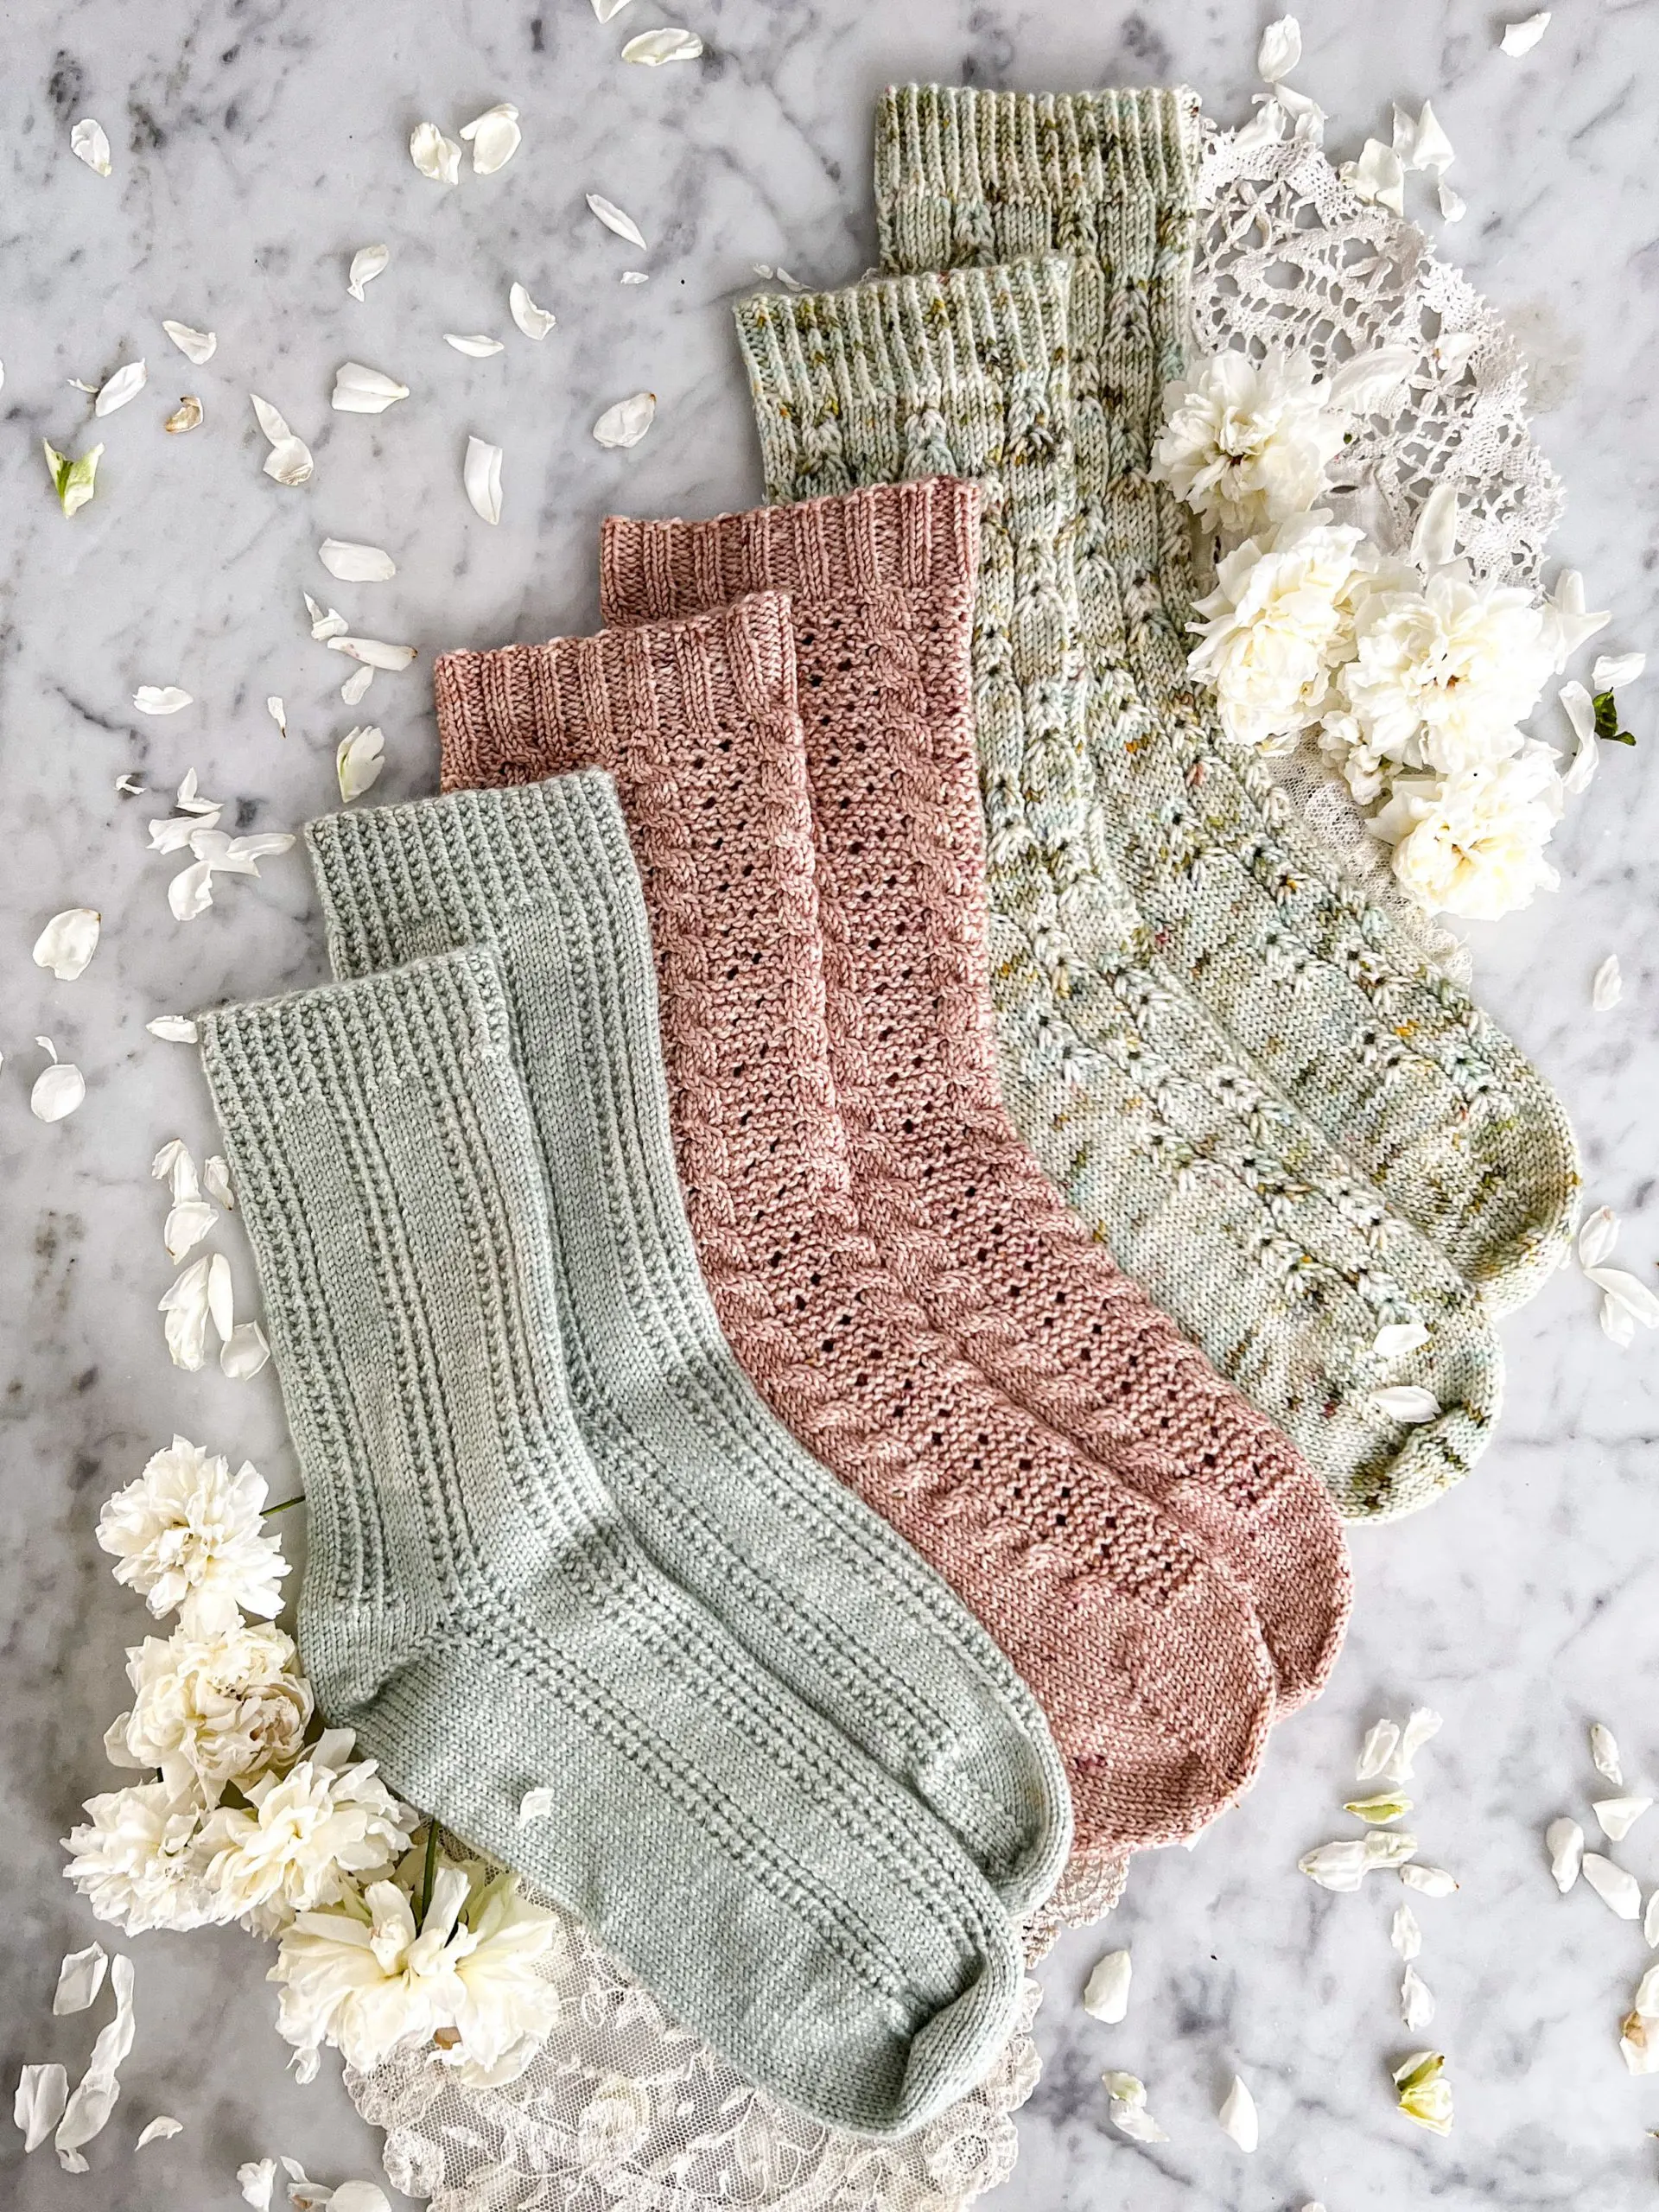 Three pairs of socks—one mint green, one pink, and one green with brown and yellow speckles—are laid out in a staggered stairstep fashion on top of a white marble countertop. They're surrounded by small white roses.